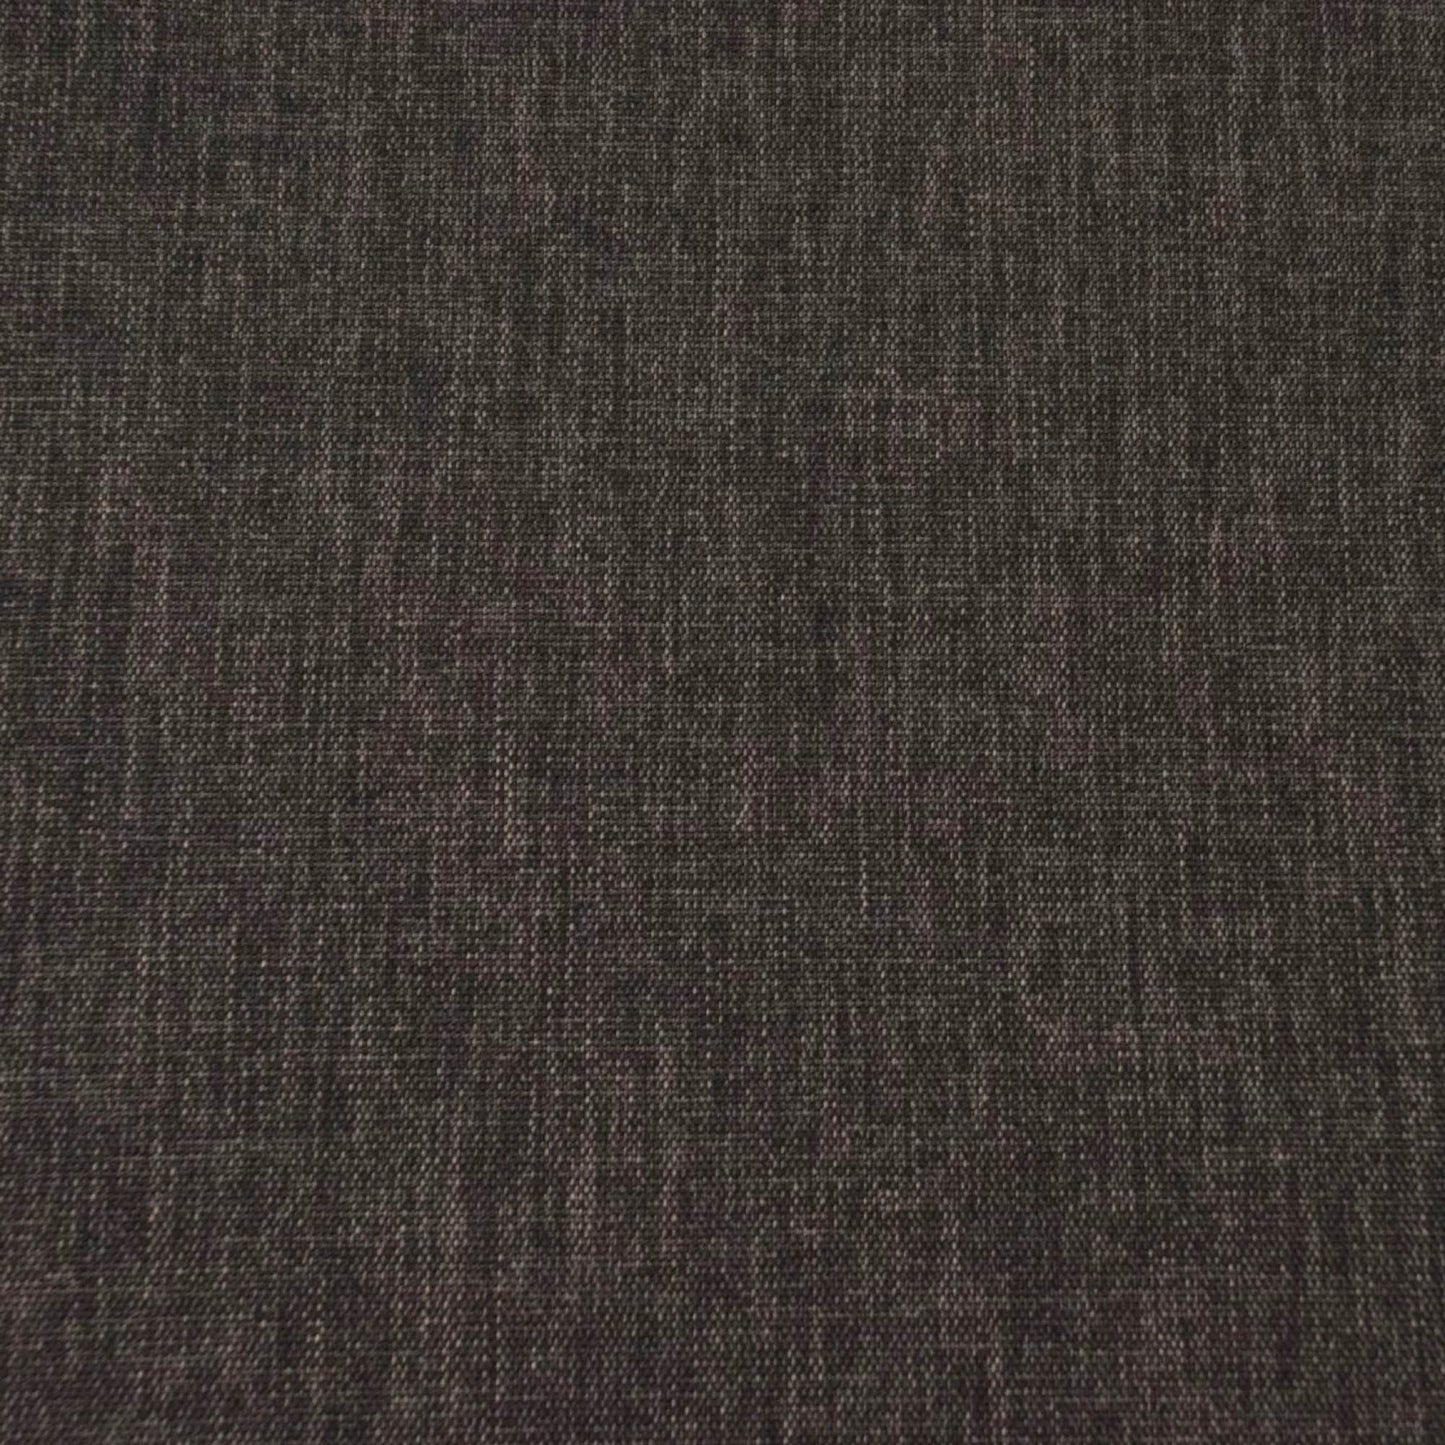 KEYLARGO ANTHRACITE FABRIC SAMPLE | VALUE COLLECTION